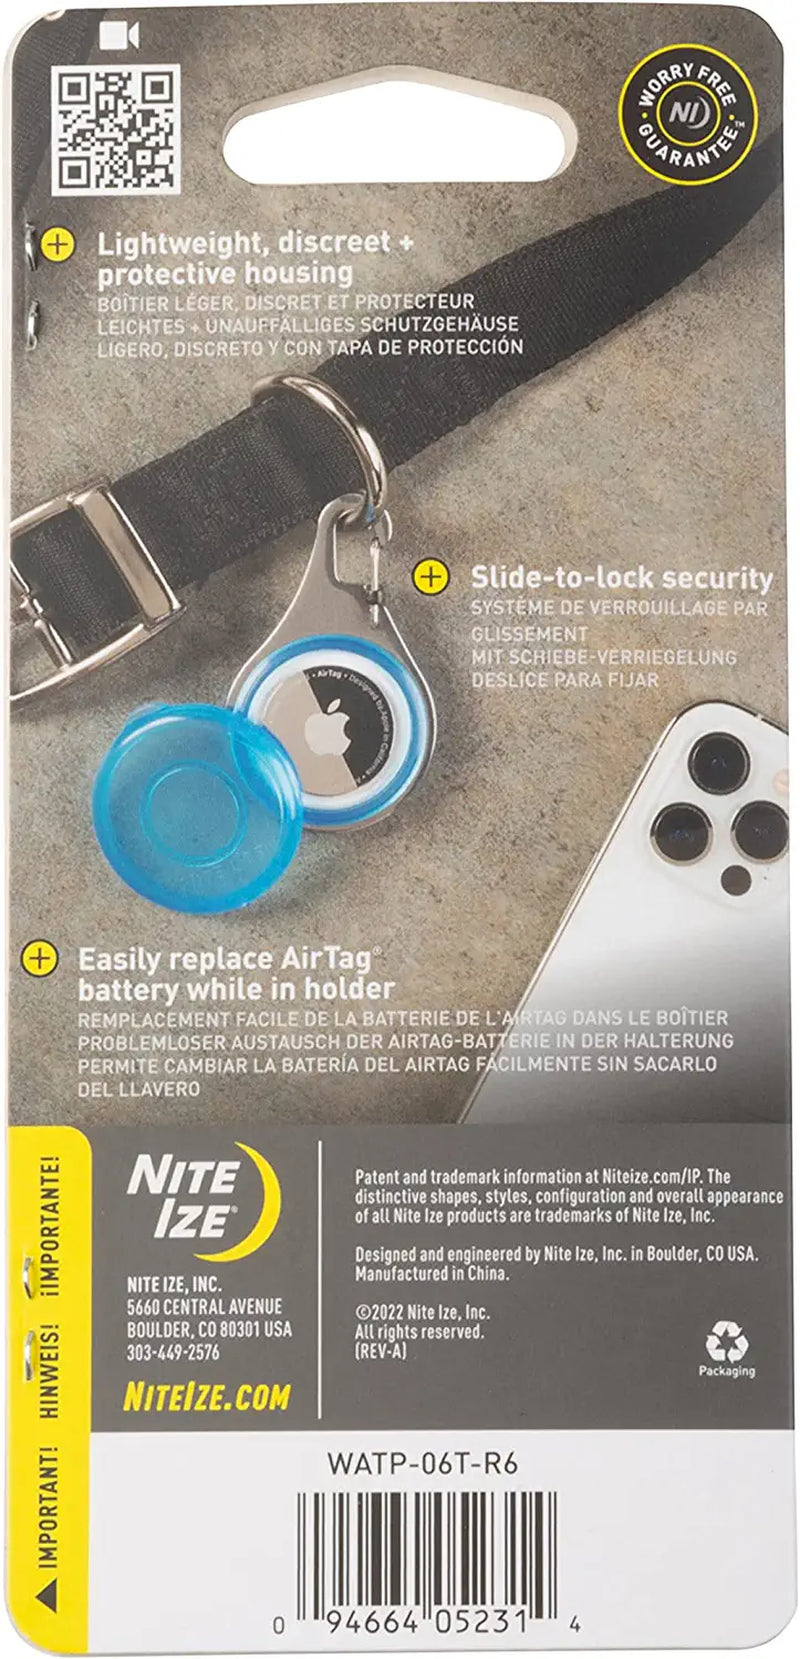 Nite Ize, Inc. WATP-06T-R6 Nite IZE Wearabout Clippable, Apple Airtag Locking Carabiner for Pets, Smoke Tracker Holder Electronics > GPS Accessories > GPS Cases Nite Ize   